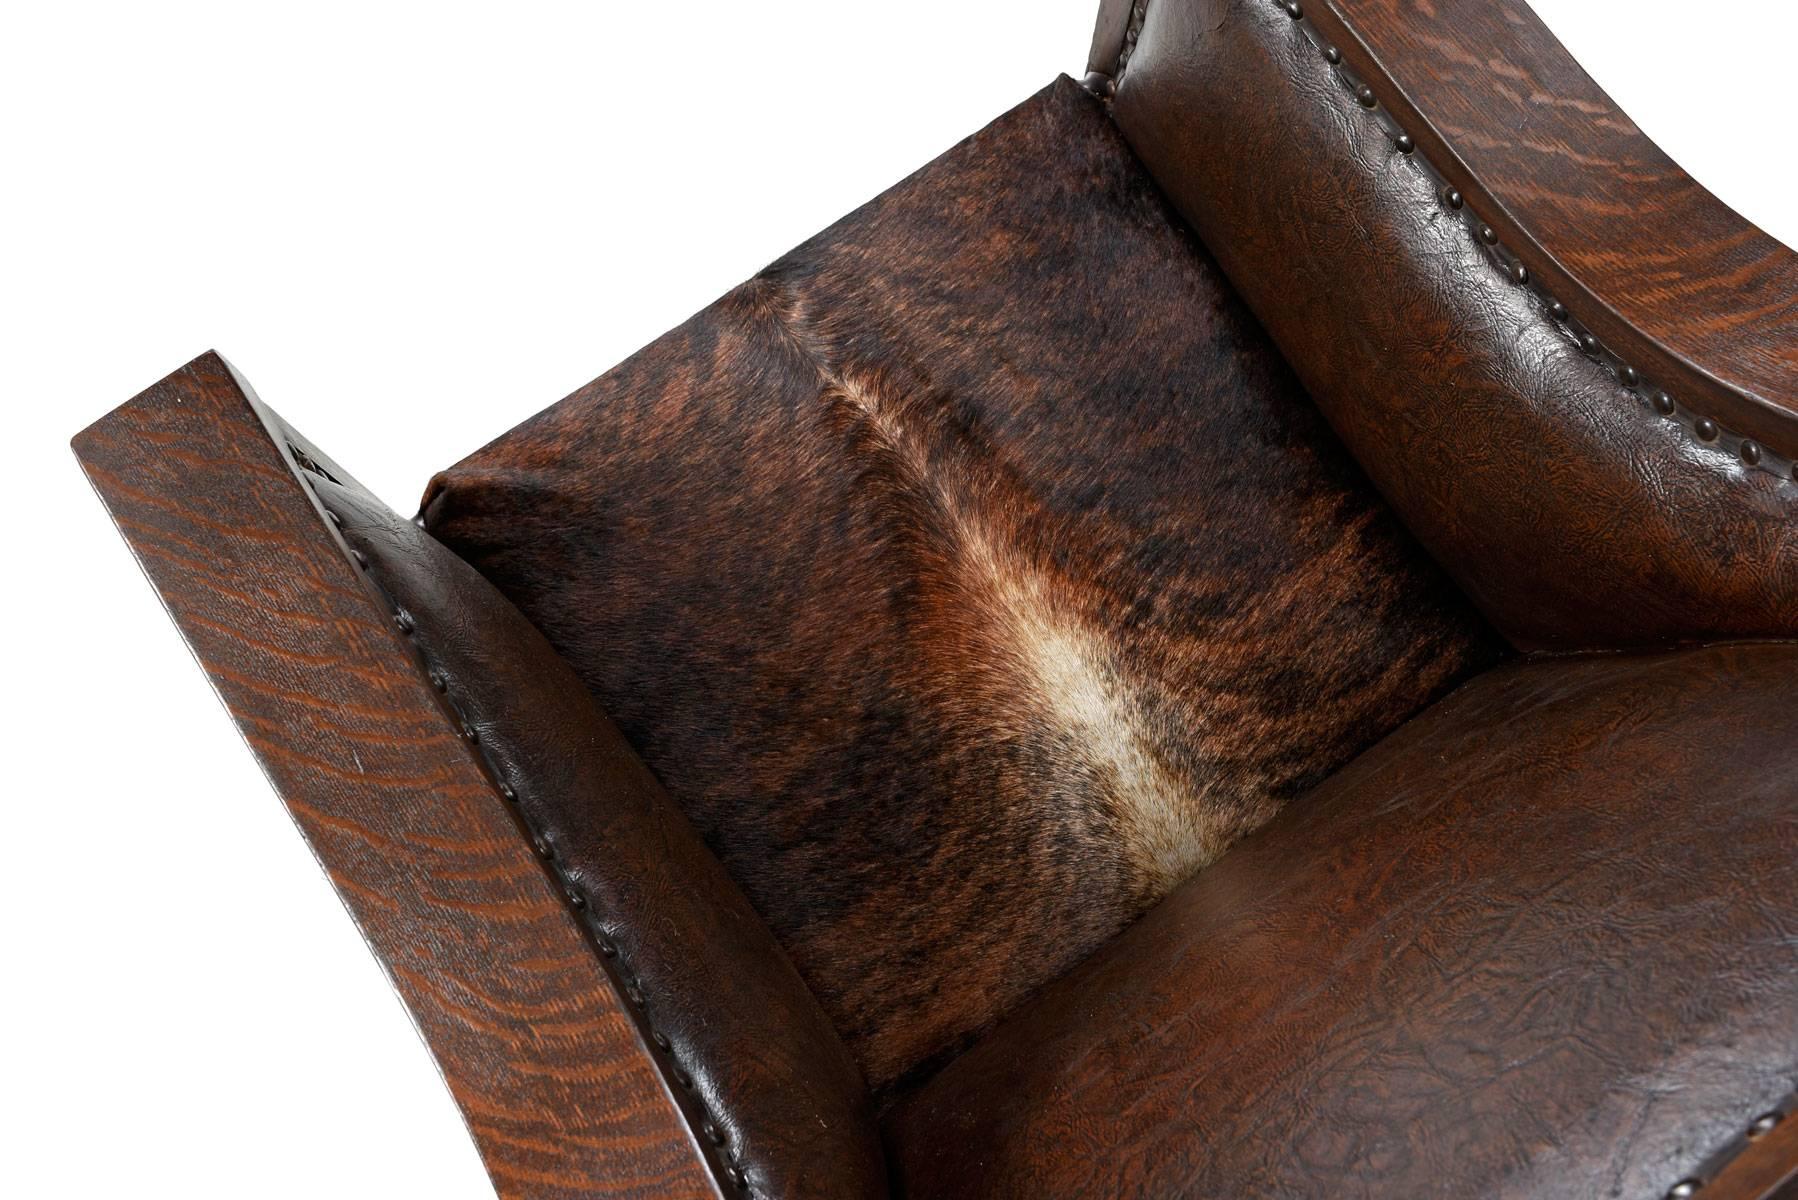 American Empire Early 1800s Handmade Empire Style Leather Thrown Chair Re-Invented in Cowhide